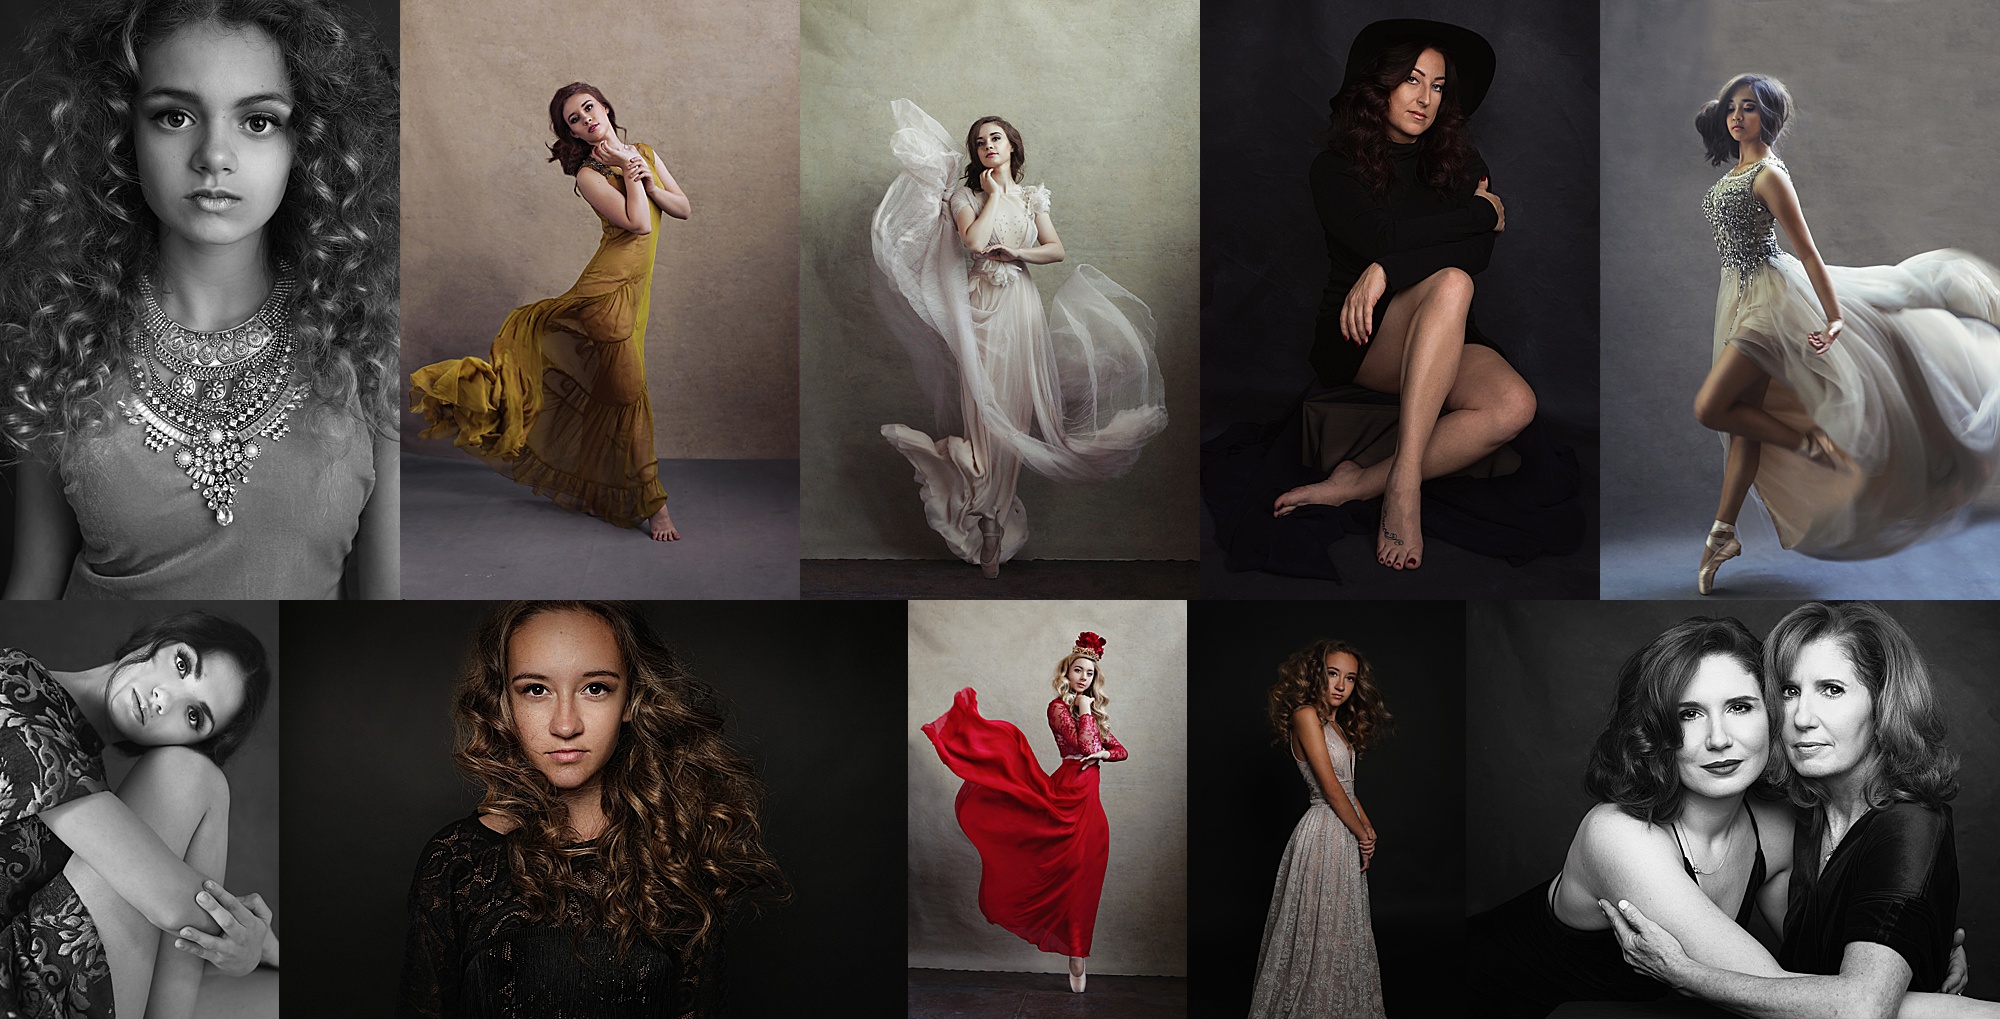 The Business of Beauty Photography With Sue Bryce | Fstoppers